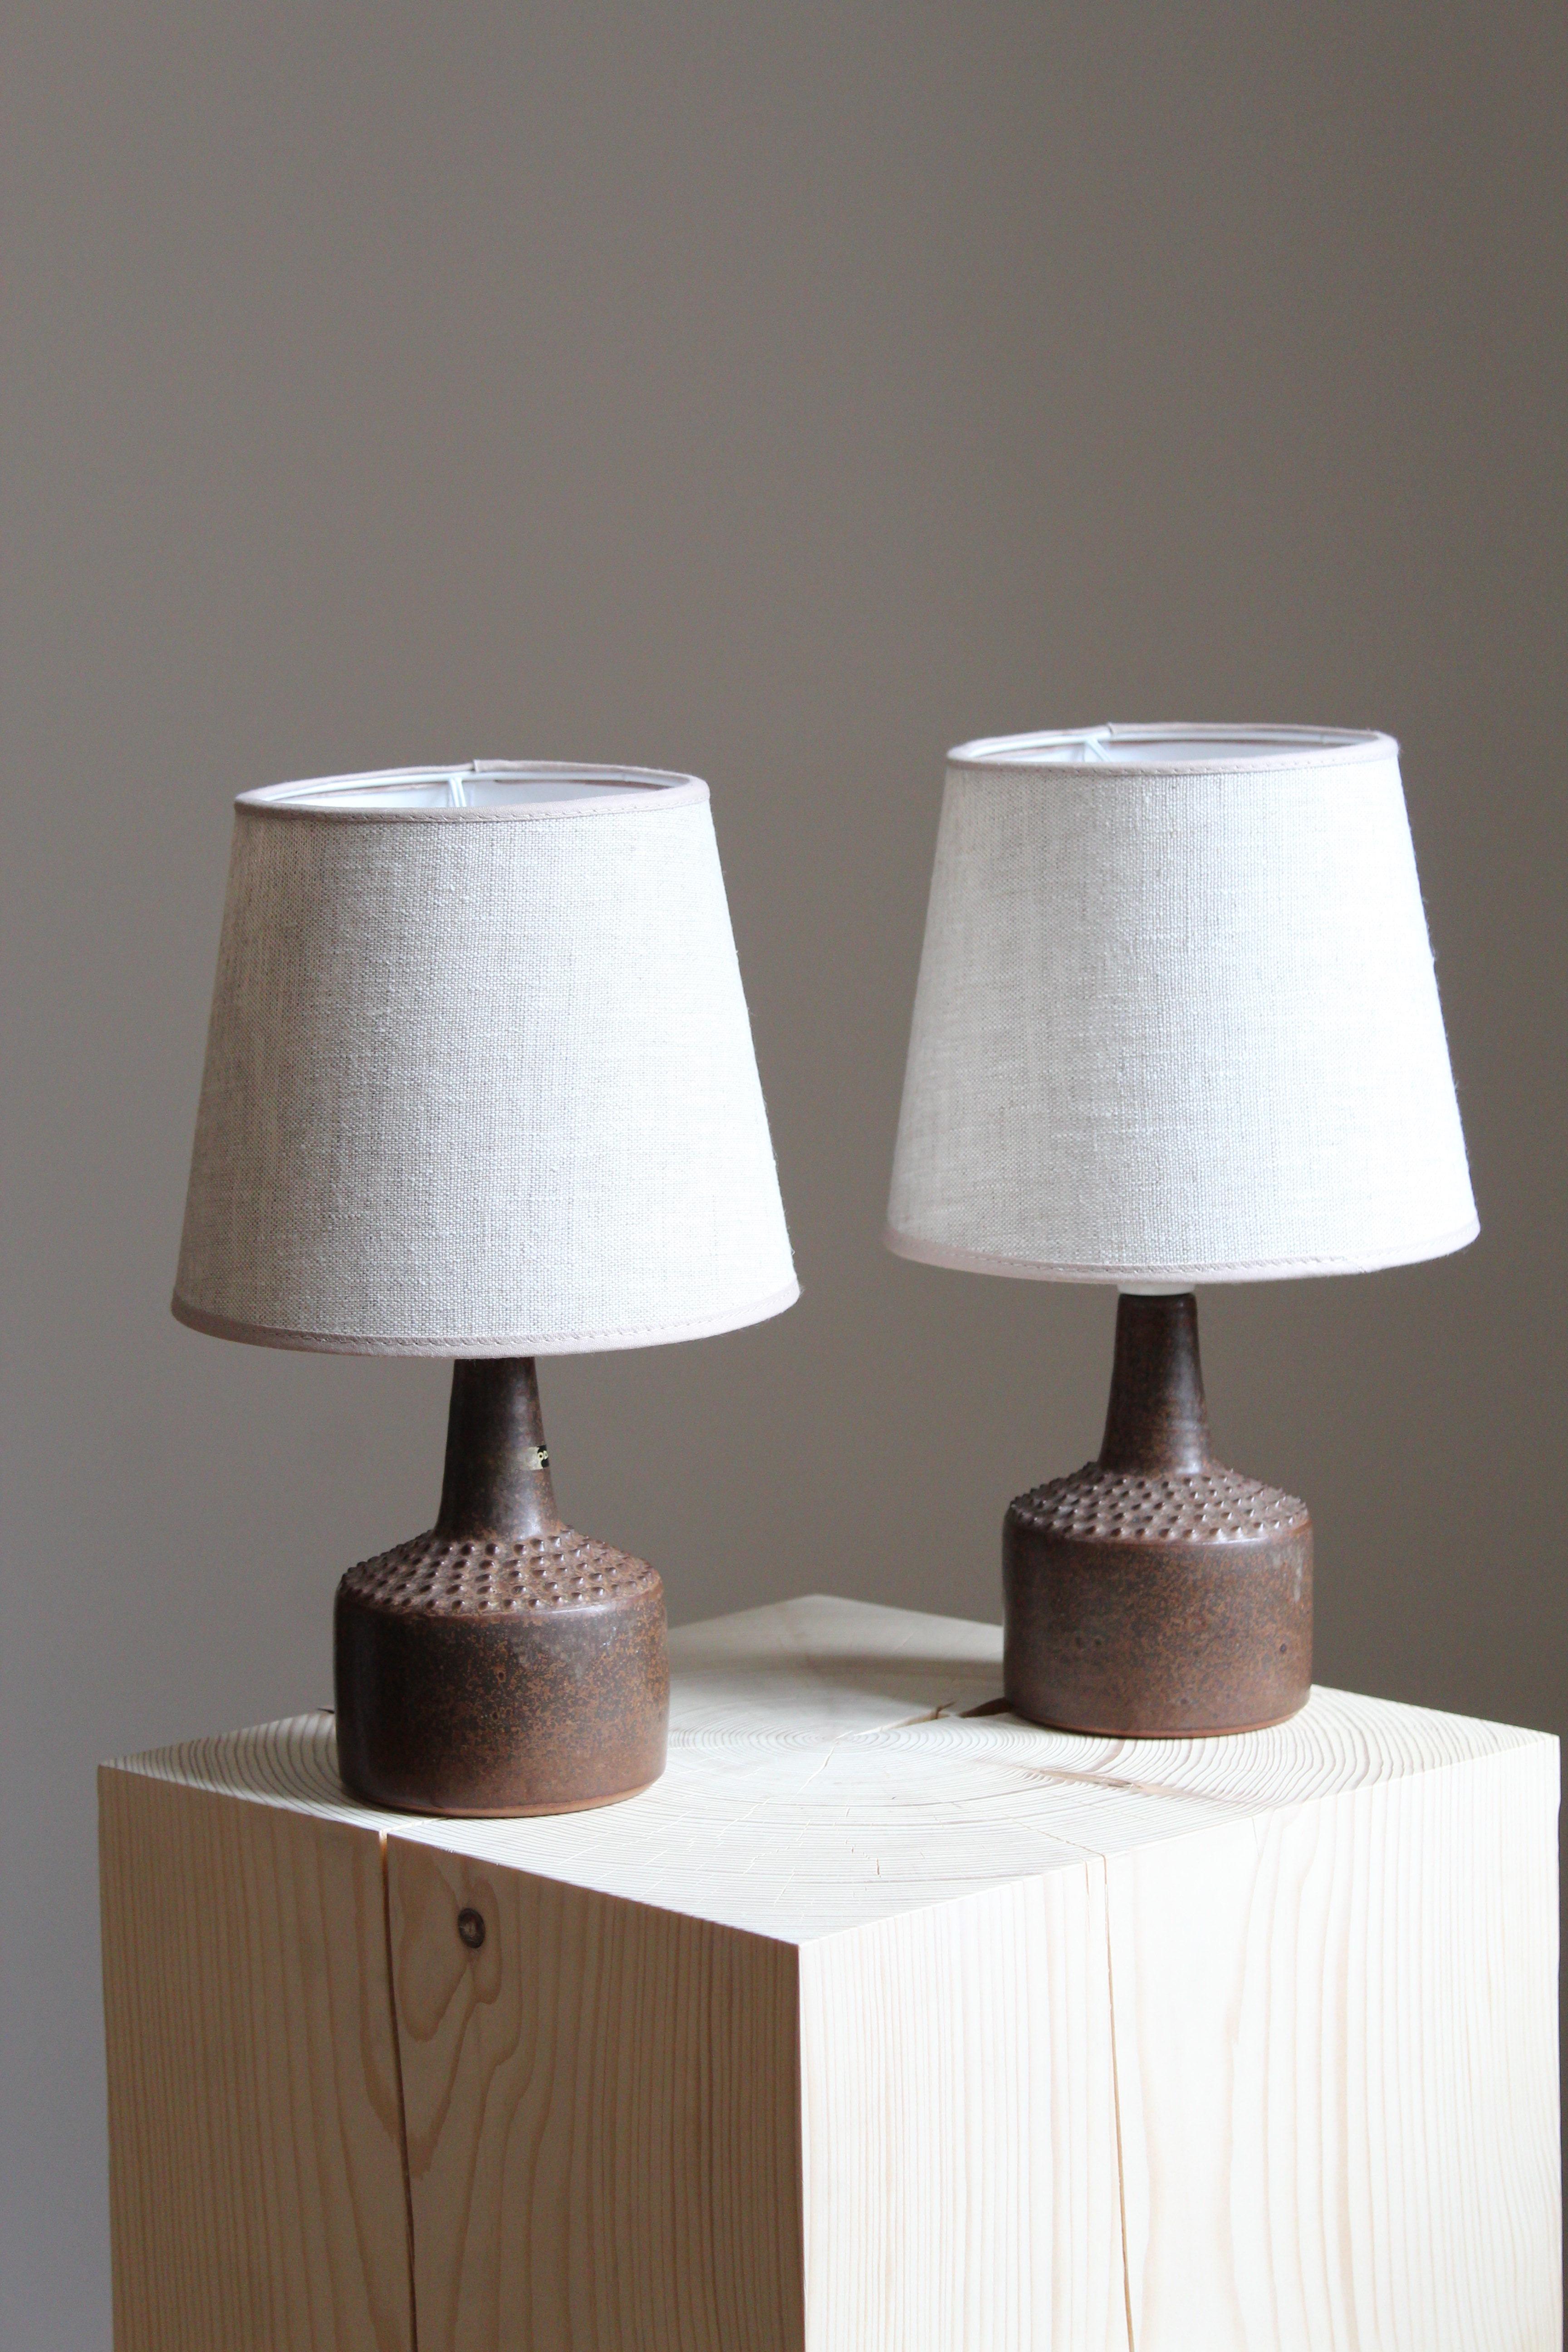 A pair of small table lamps. Produced and designed by Rolf Palm, Sweden.

In glazed stoneware. Lampshades not included.  Dimensions are without shades.

Glaze features brown-black colors.